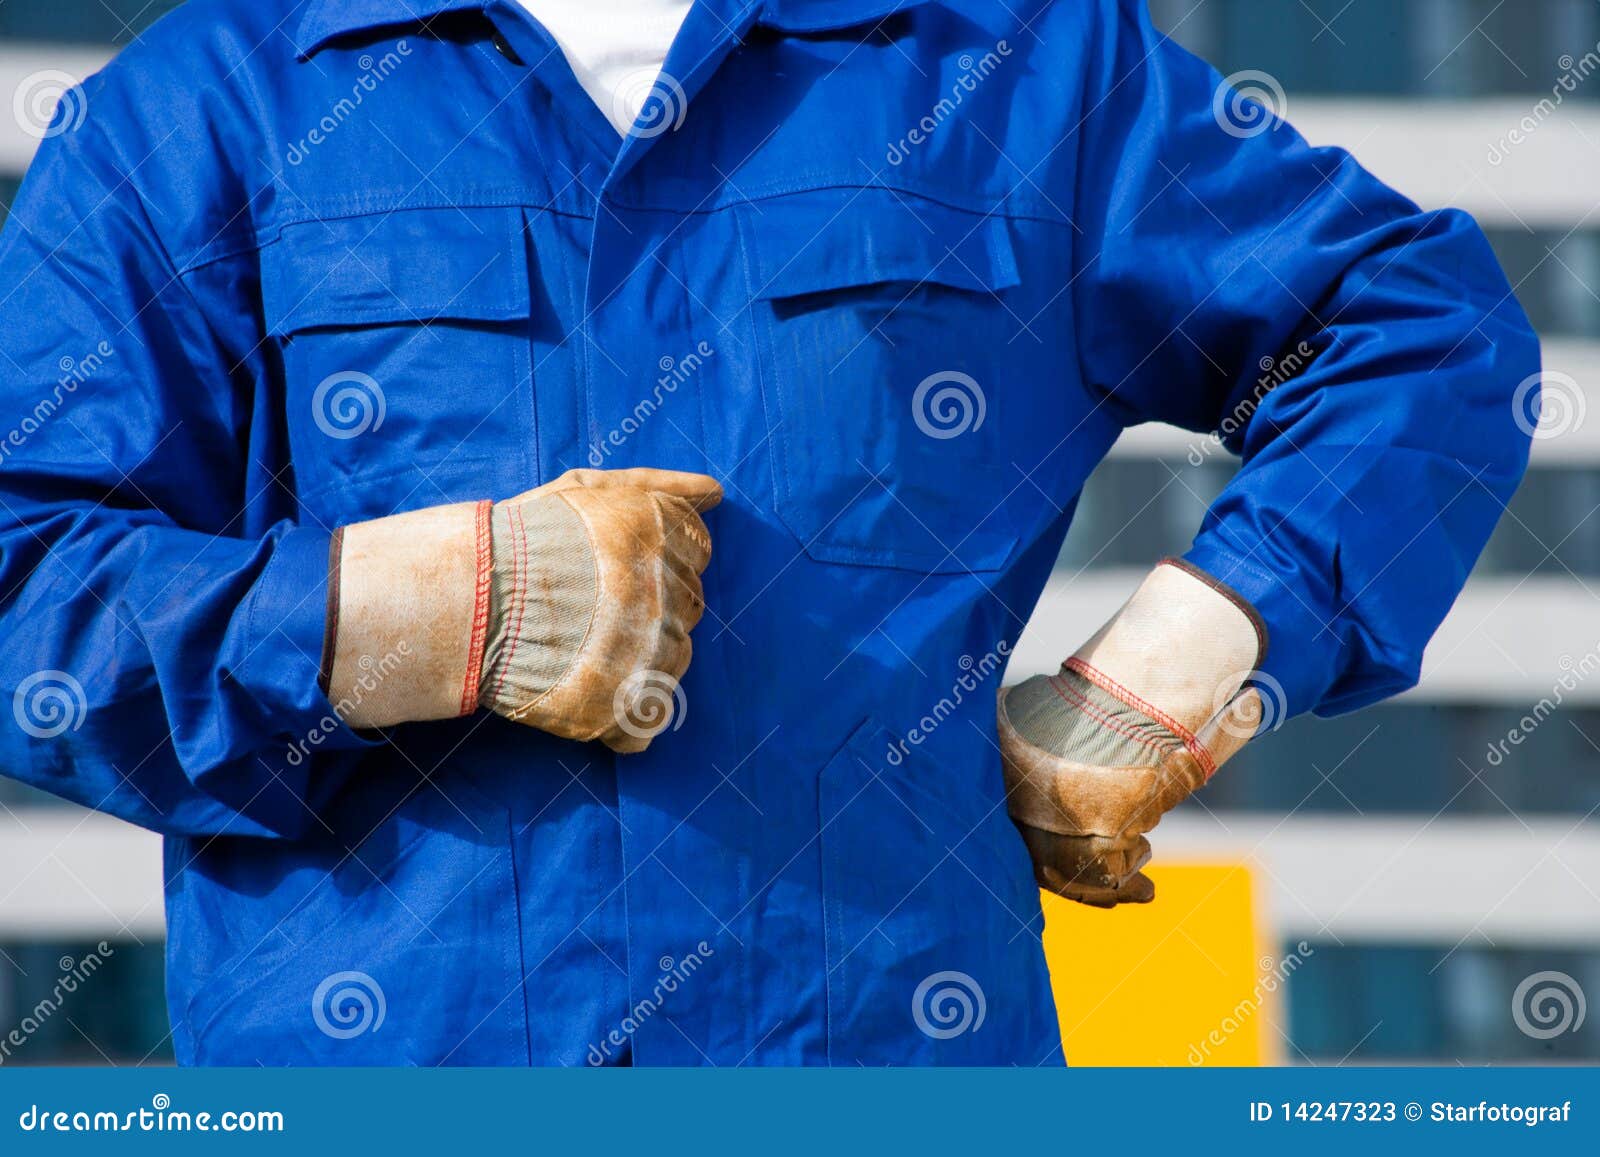 Dirty gloves stock image. Image of blue, wear, clothing - 14247323